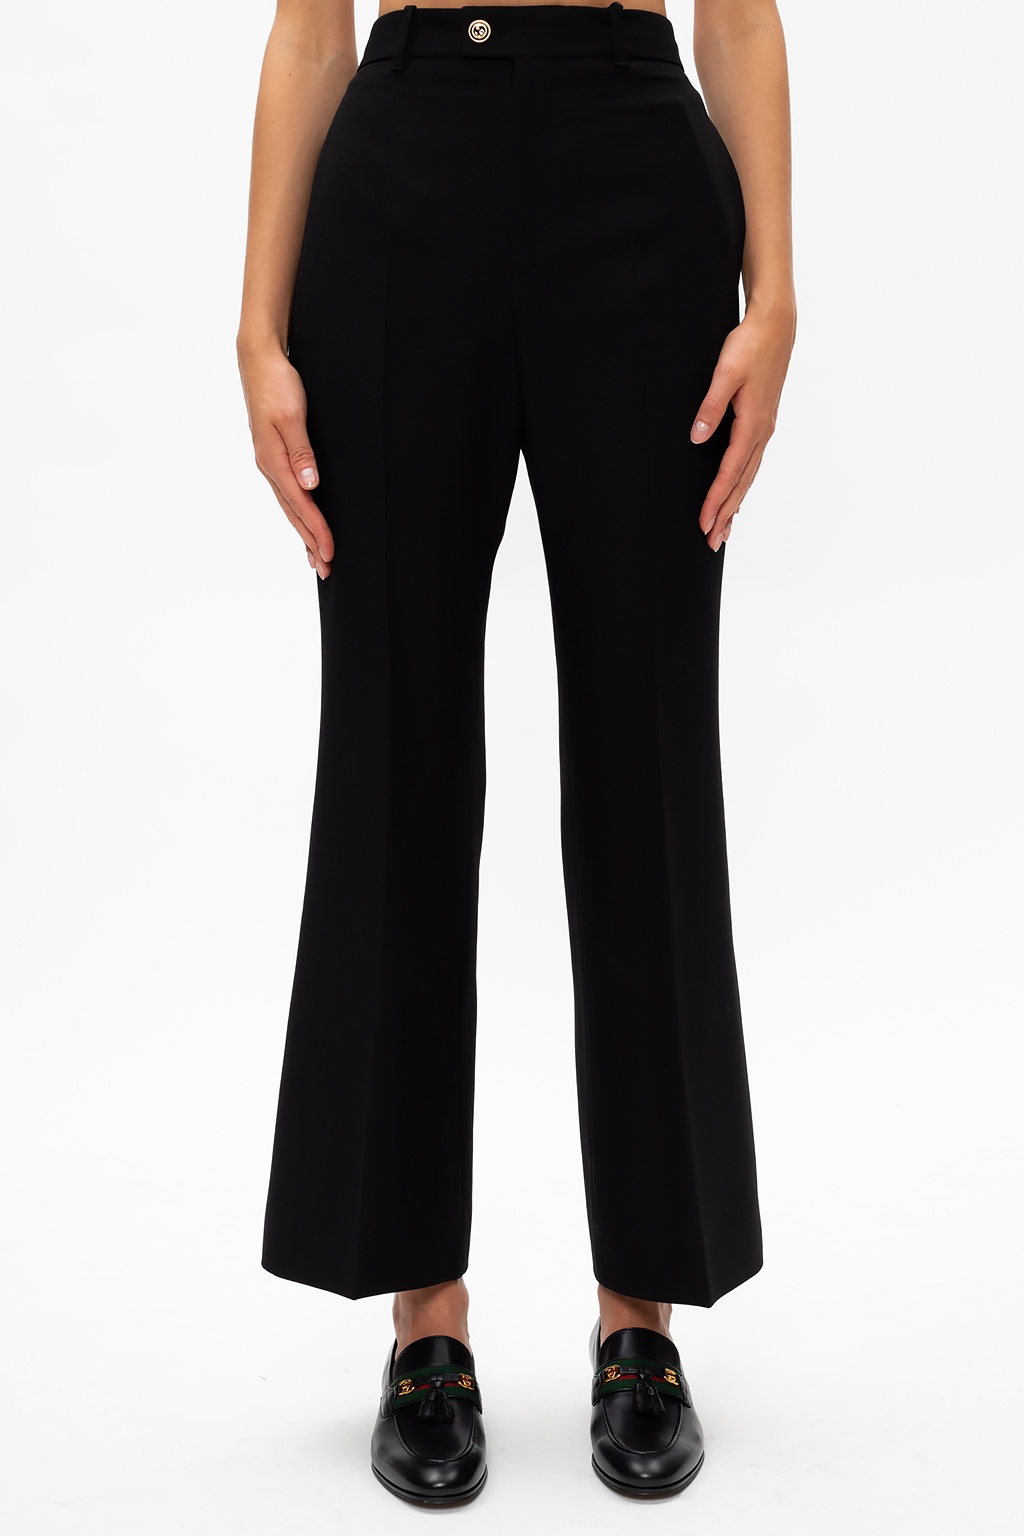 Gucci Pleat-front trousers Class with logo